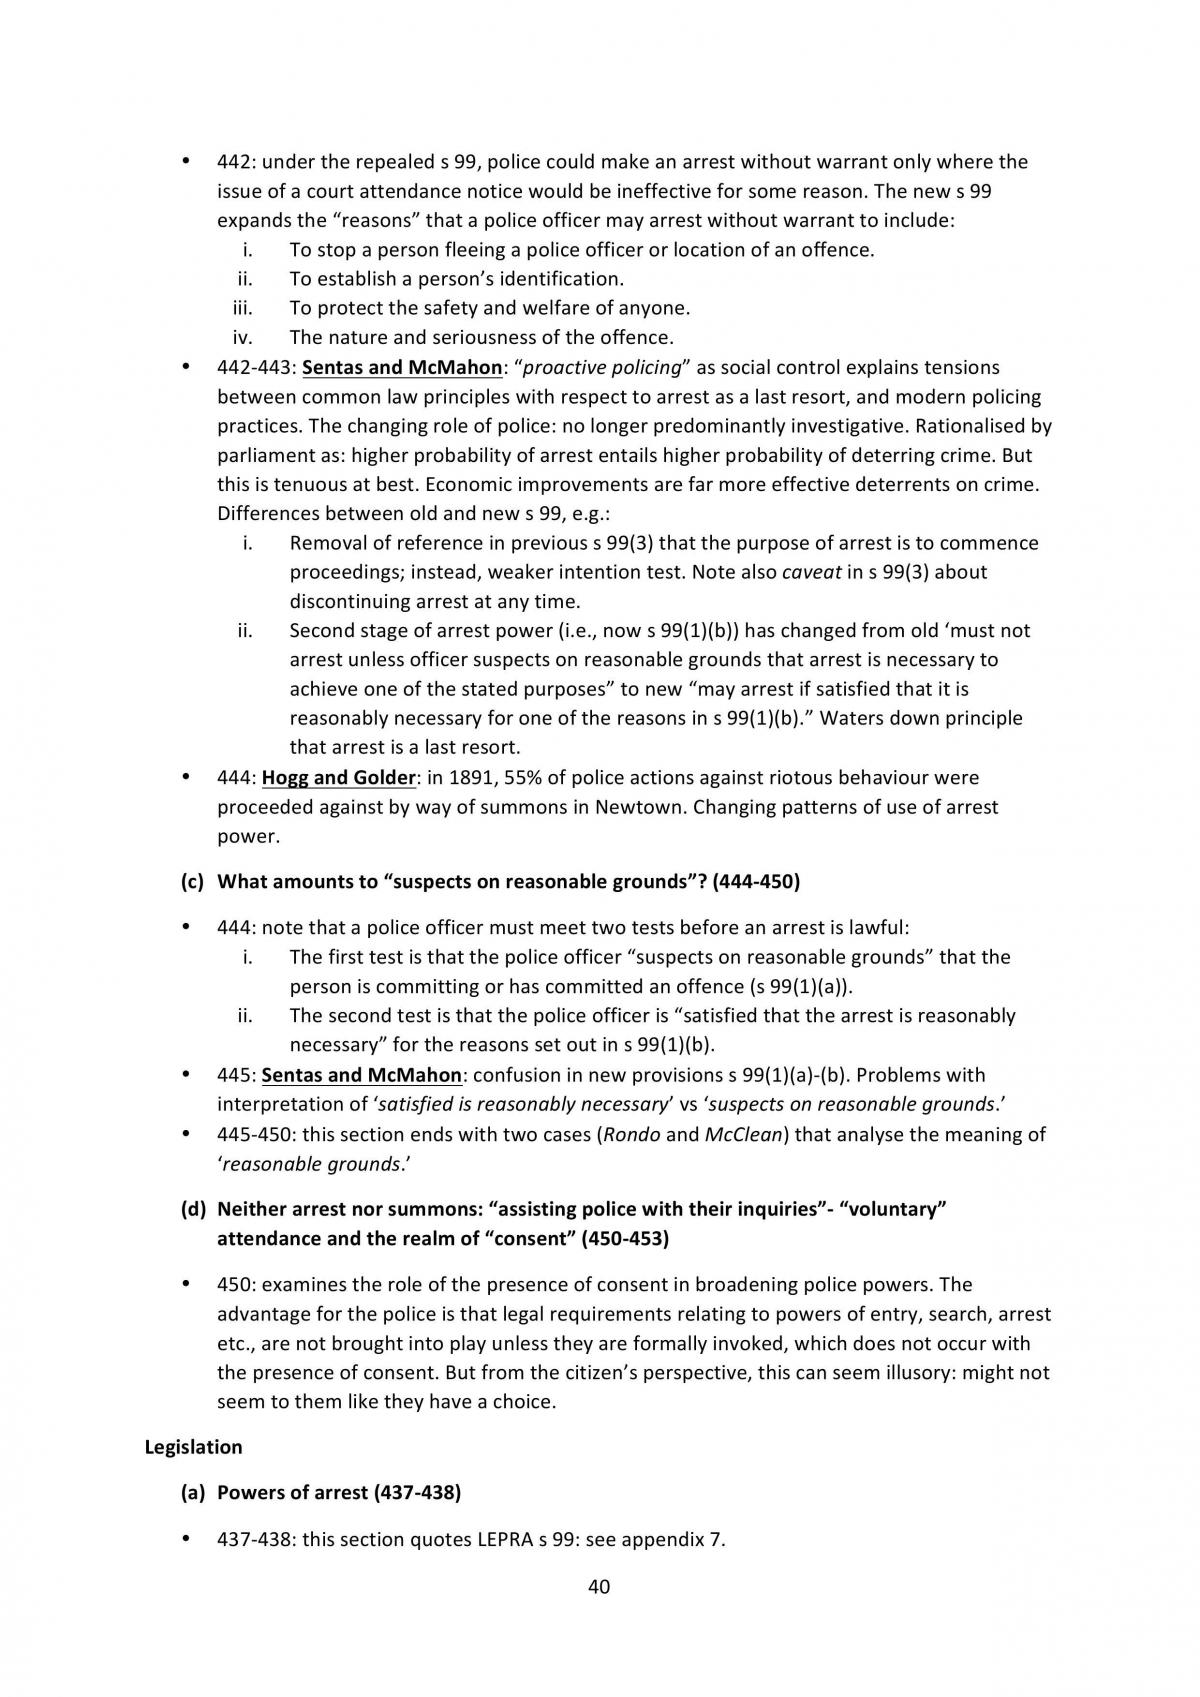 Crime and the Criminal Process Course Notes - Page 40